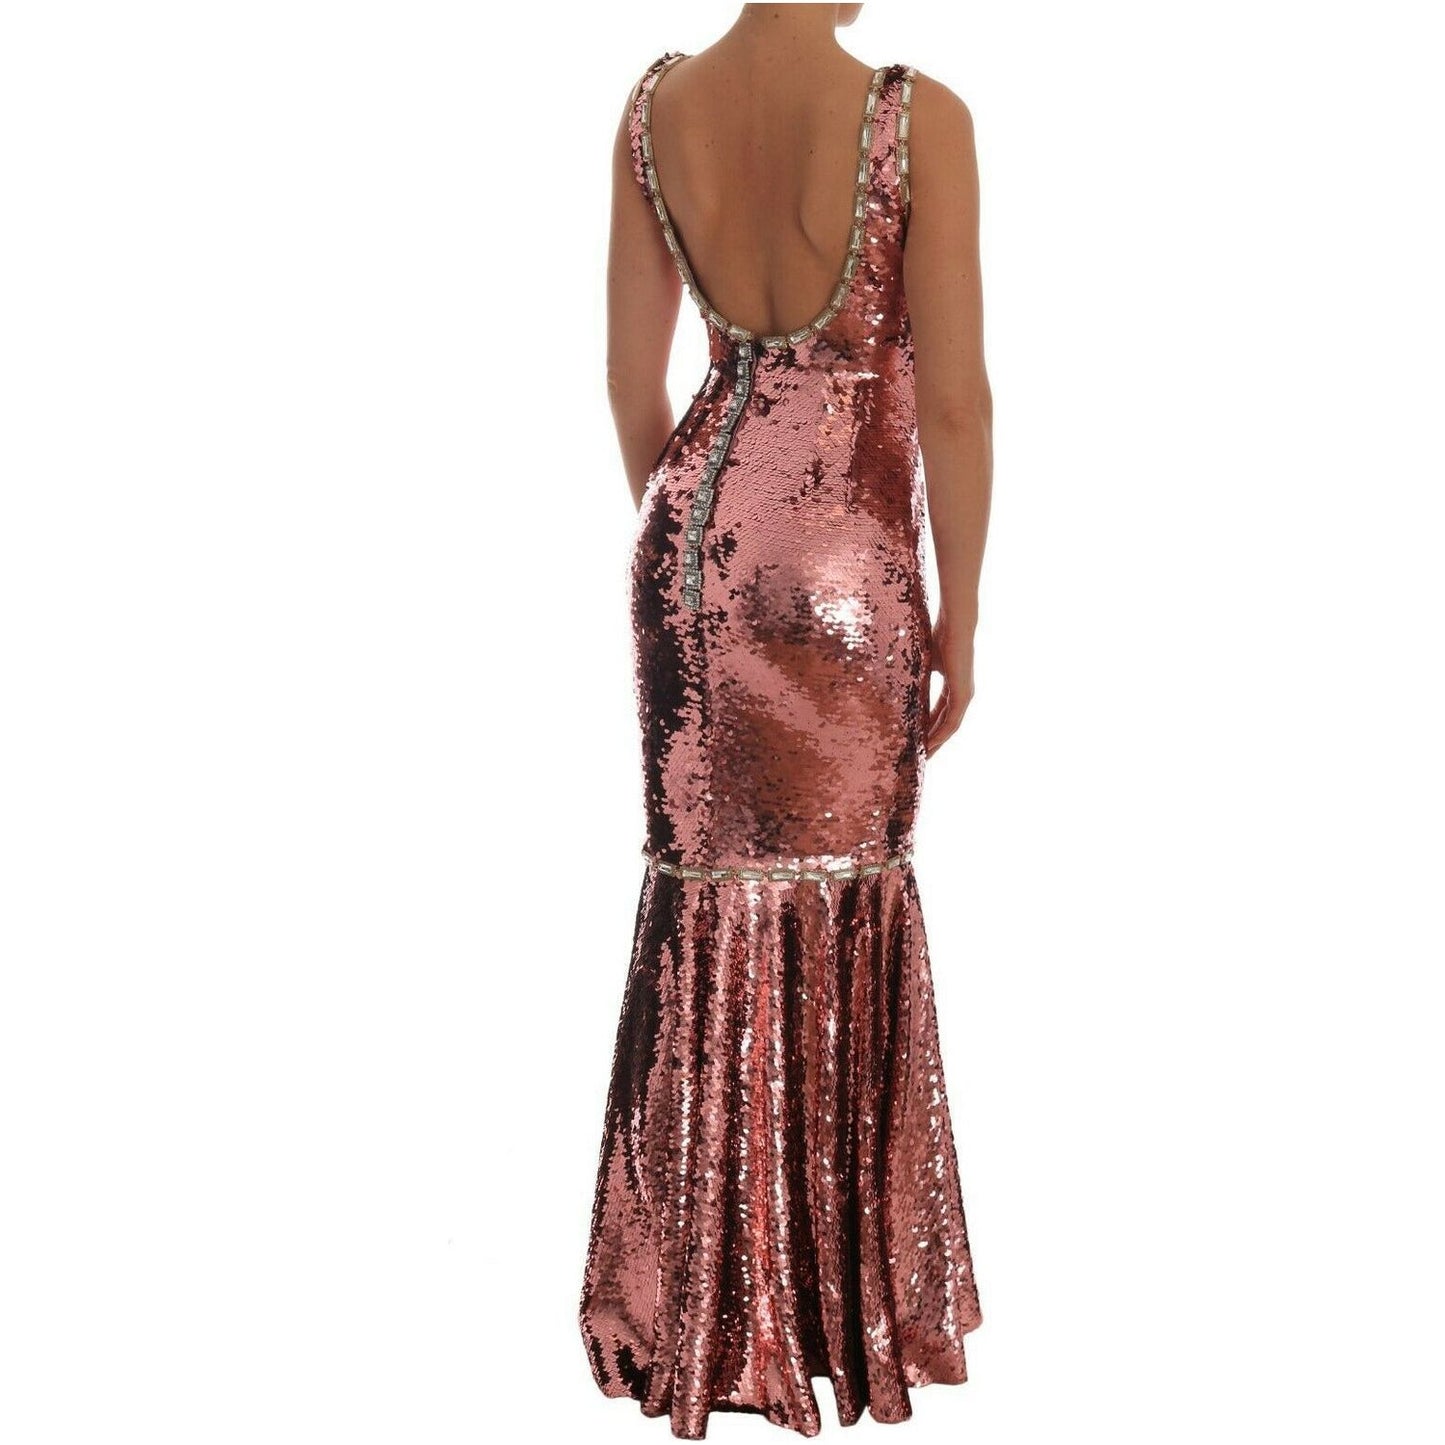 Dolce & Gabbana Enchanted Sicily Fairy Tale Sequined Gown WOMAN DRESSES pink-sequined-sheath-crystal-dress-gown